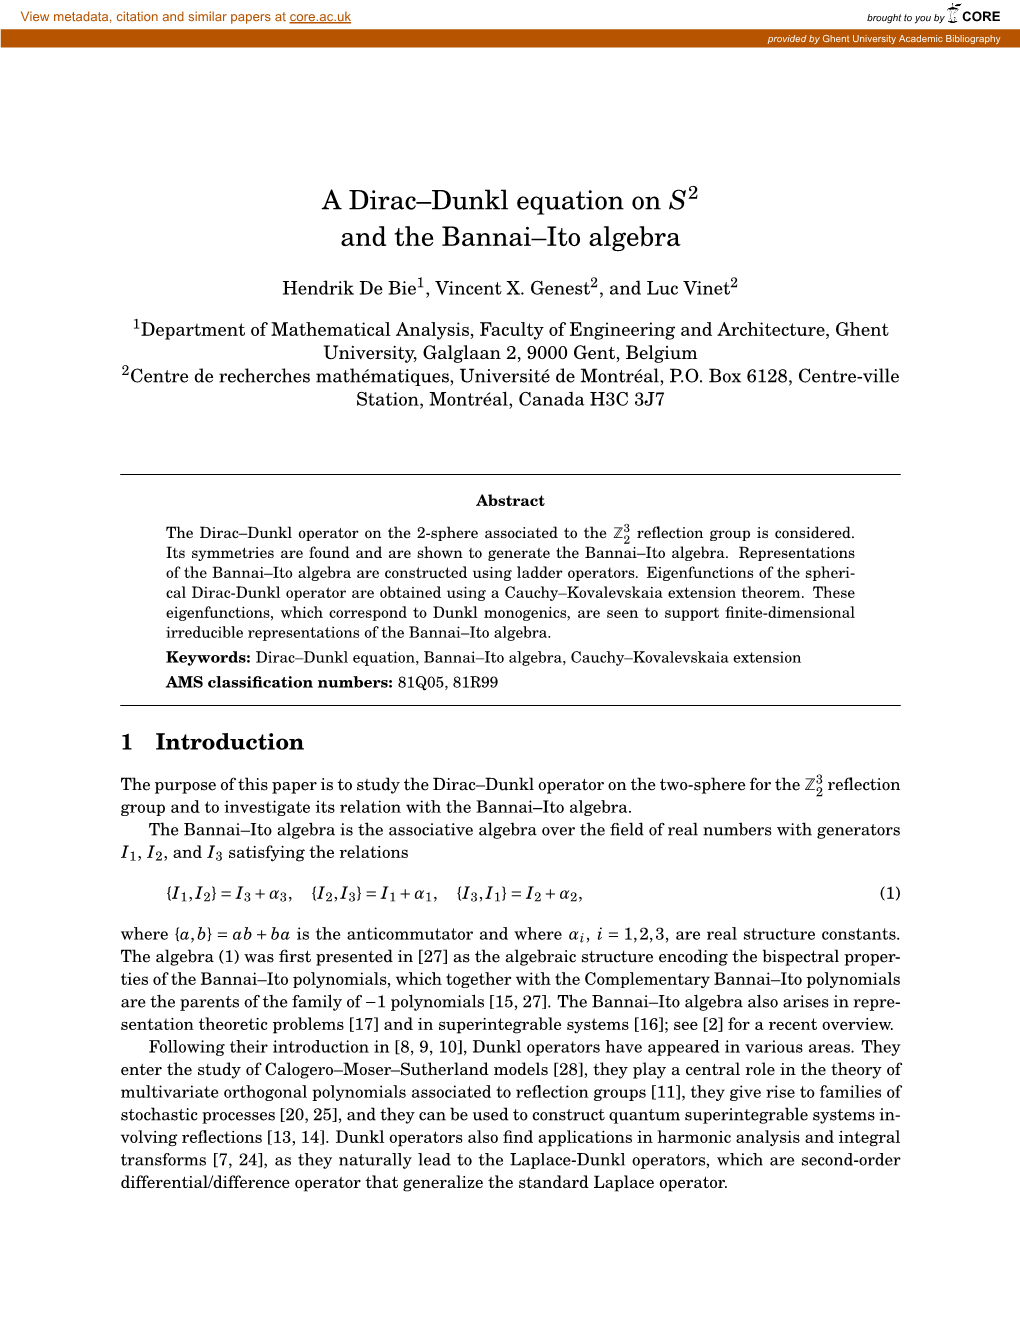 A Dirac–Dunkl Equation on S2 and the Bannai–Ito Algebra